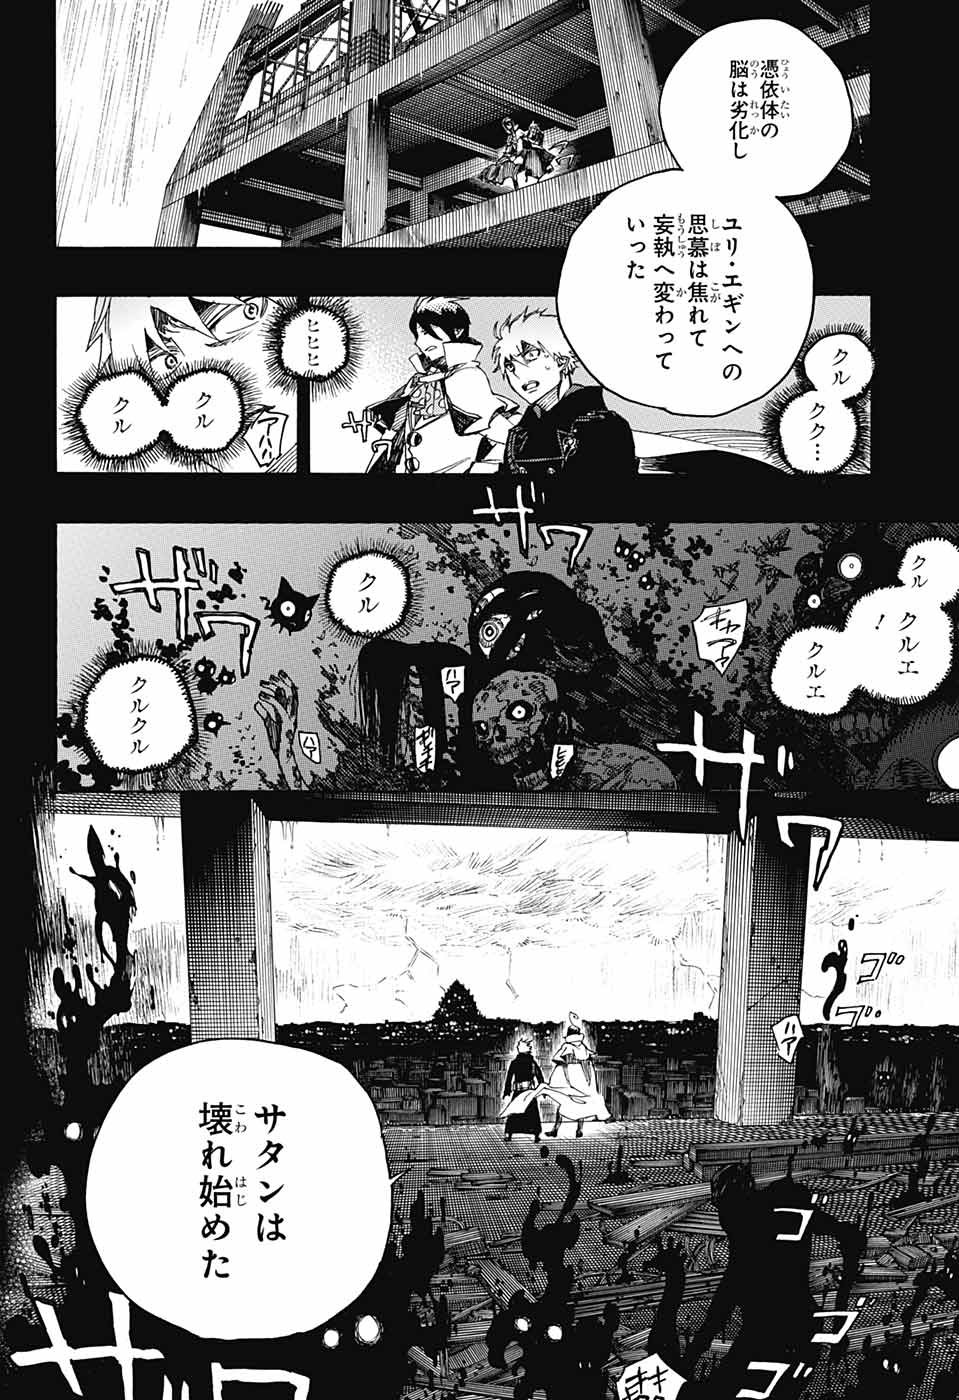 Ao no Exorcist - Chapter 115 - Page 2